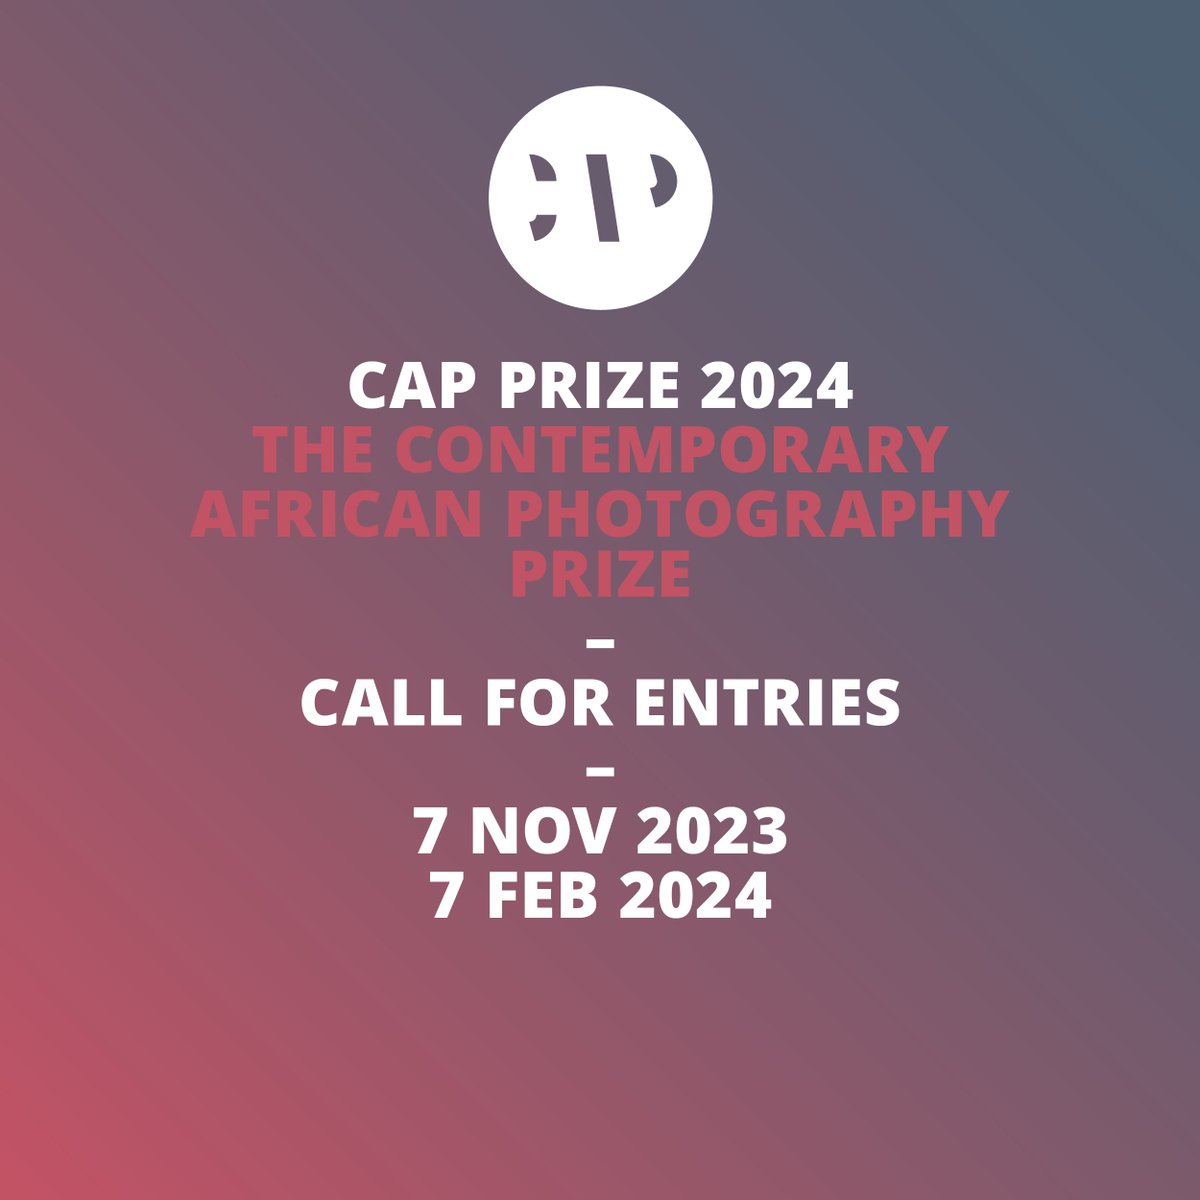 The CAP Prize 2024 – The Contemporary African Photography Prize is now open for entries. It is free to enter. Win a series of large-scale outdoor exhibitions around the globe. Enter the CAP Prize now at application.capprize.com #capprize #africanphotography